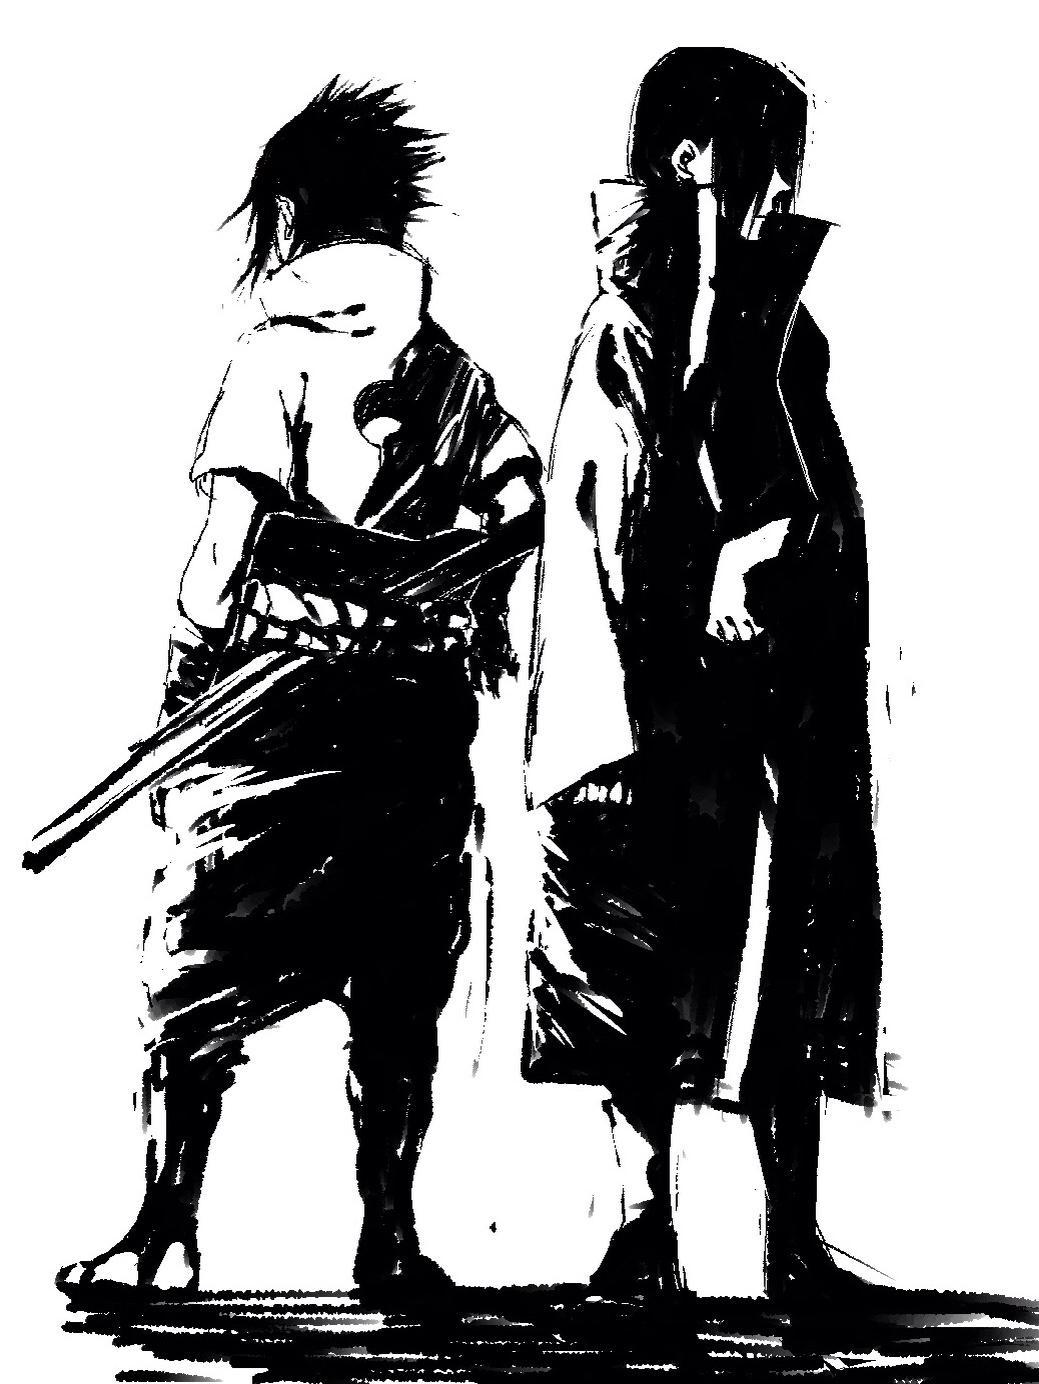 Itachi Black And White Wallpapers Top Free Itachi Black And White